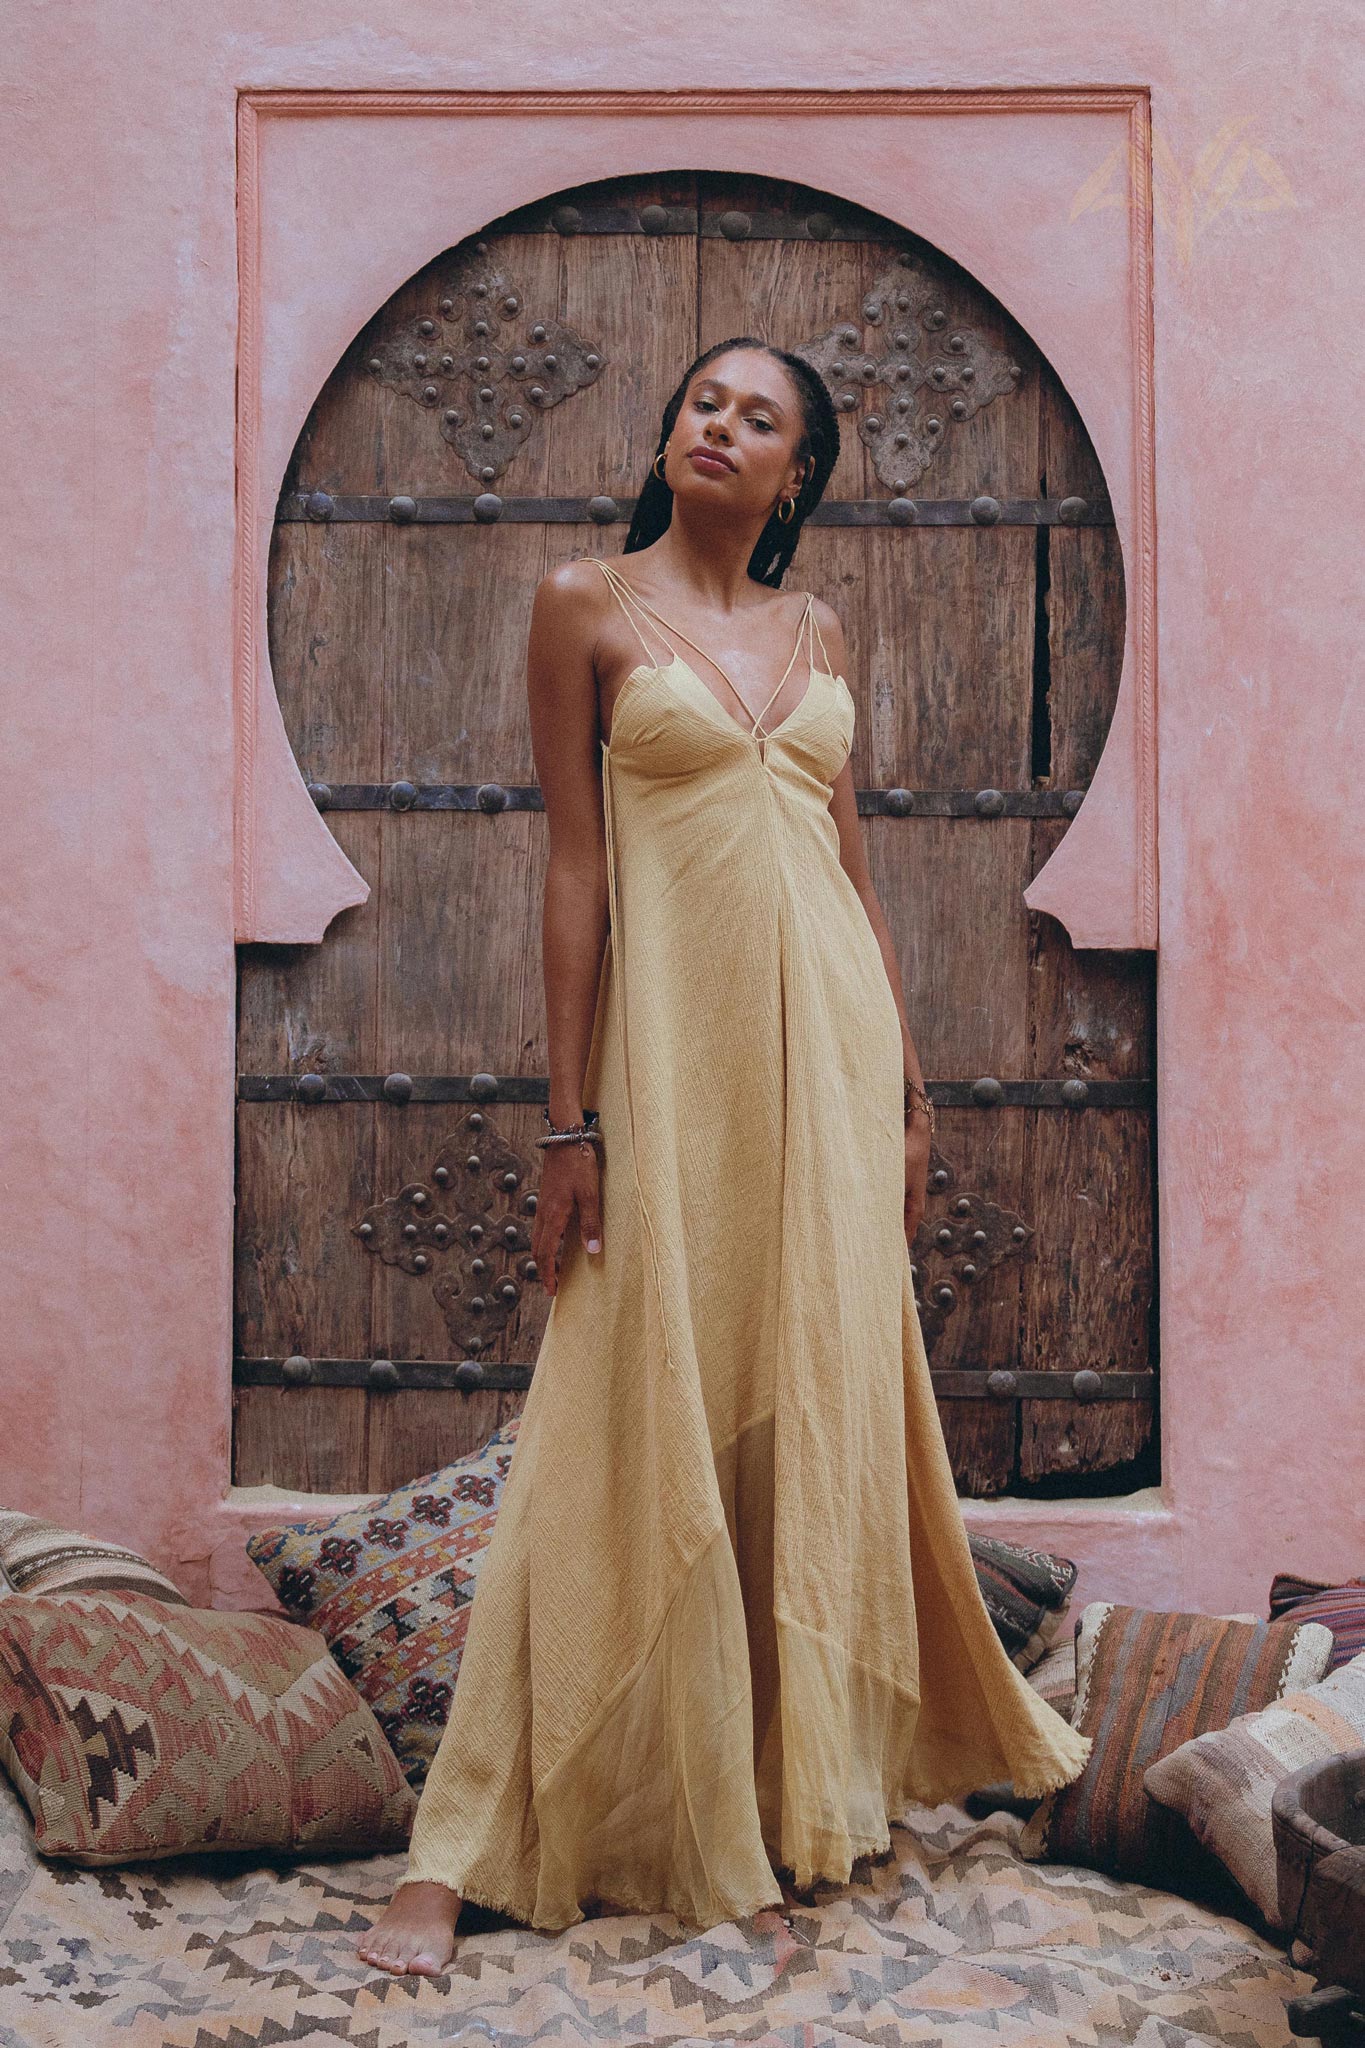 Make a statement with the elegant powder yellow dress from Aya Sacred Wear.